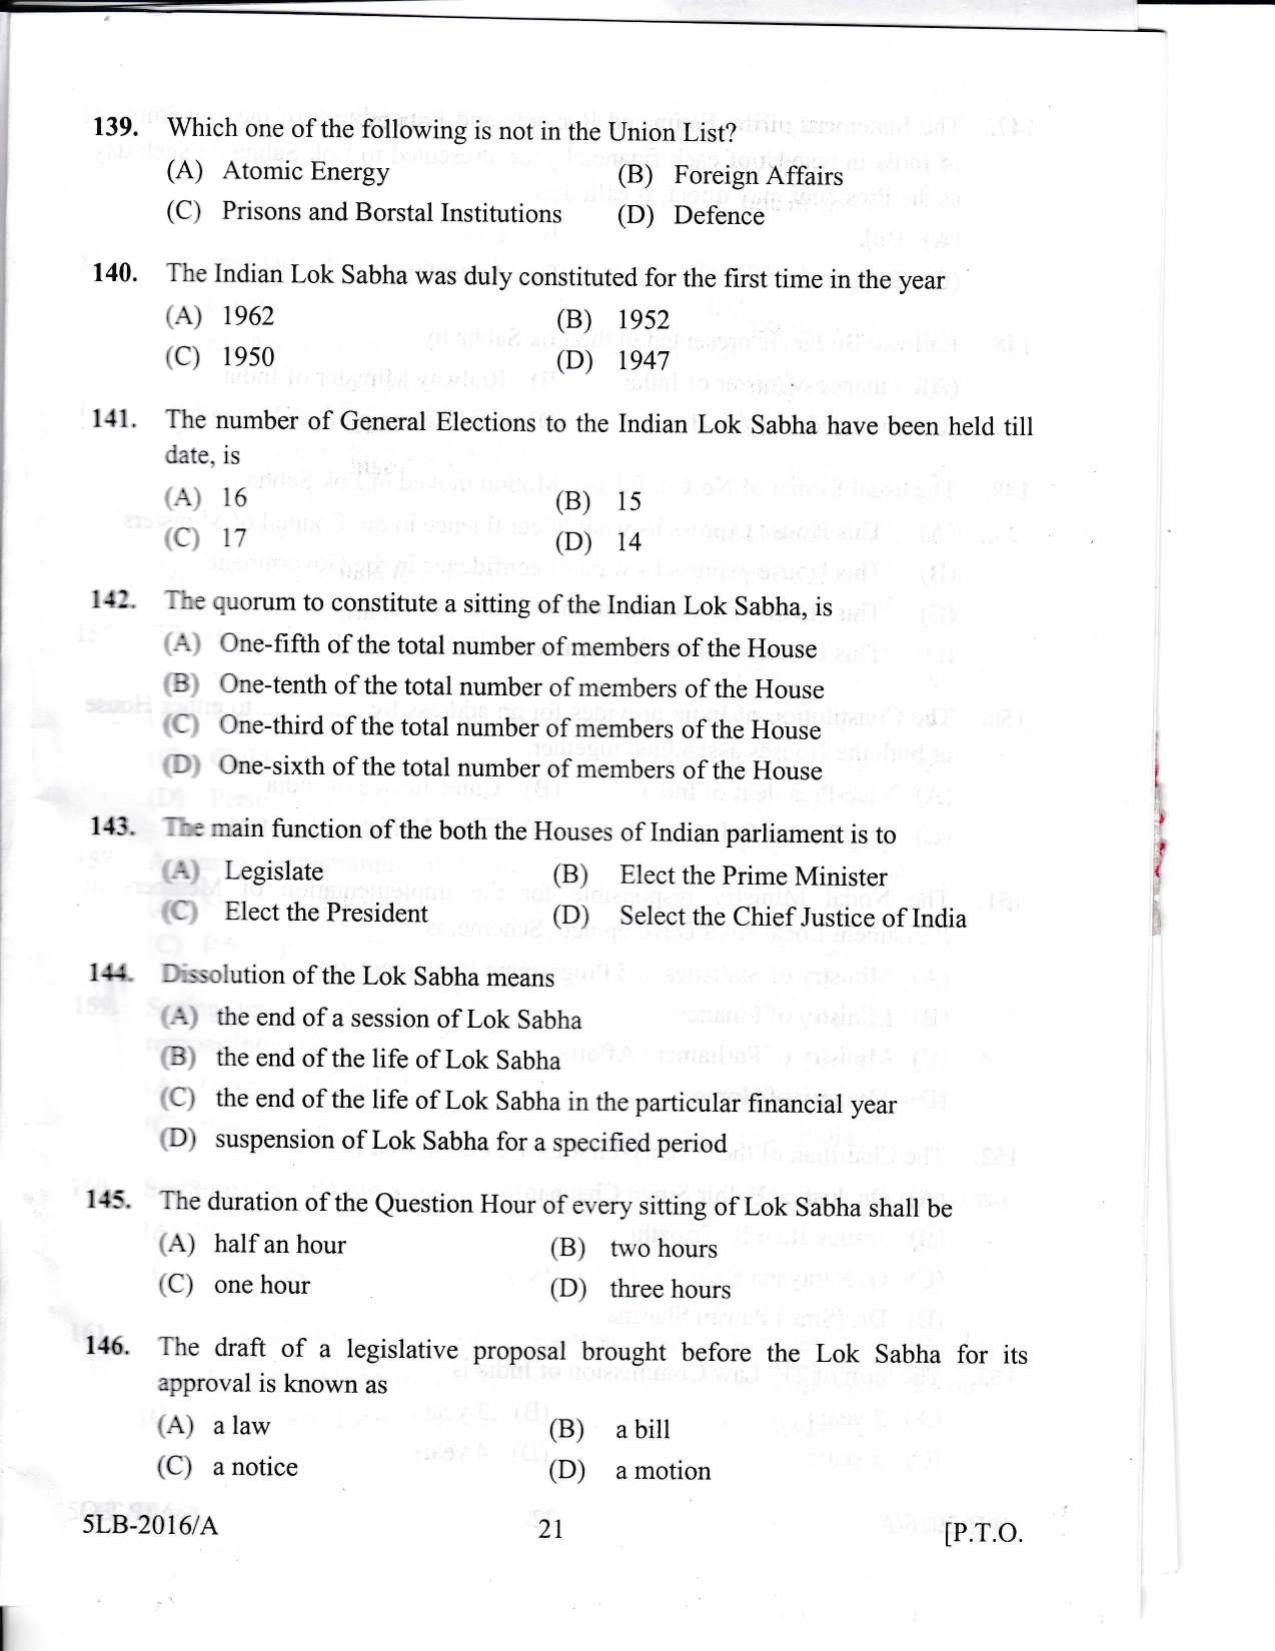 KLEE 5 Year LLB Exam 2016 Question Paper - Page 21